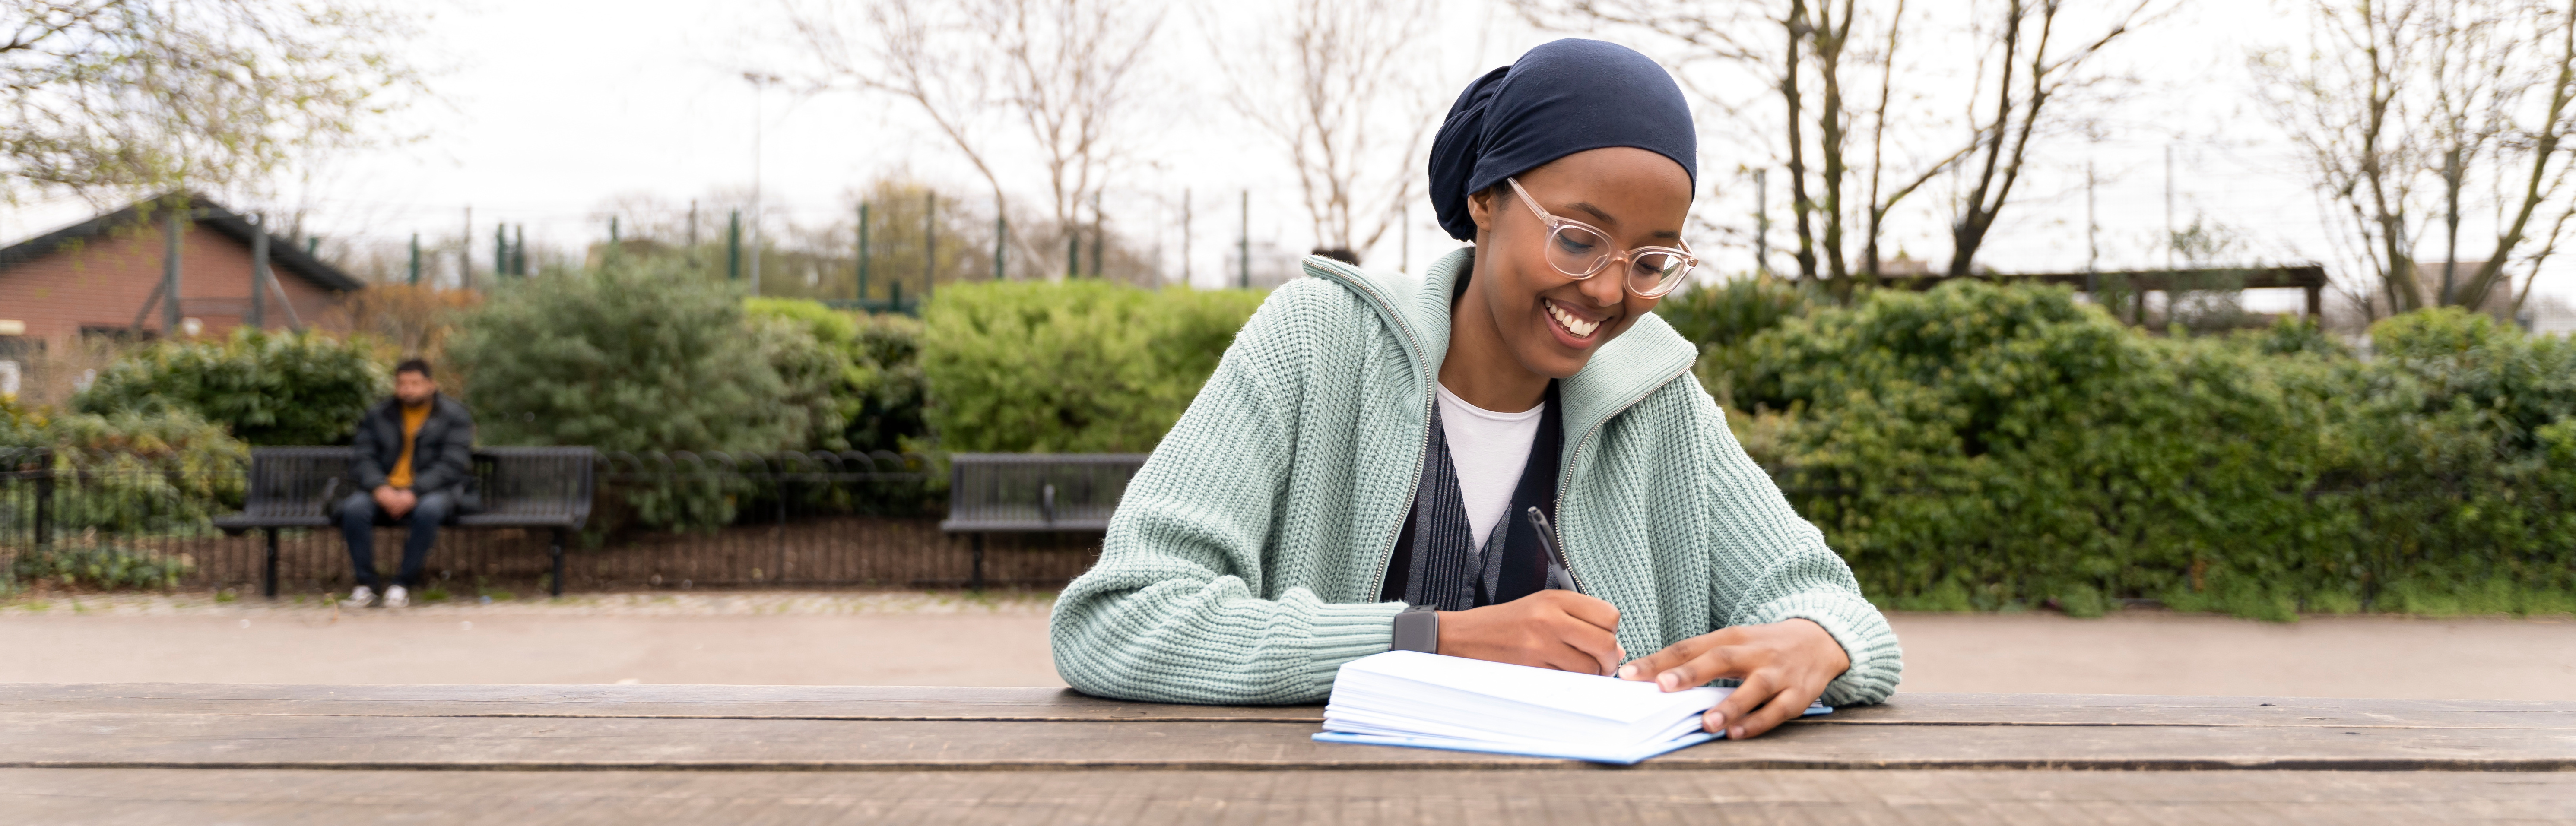 A student sits outside journaling at a picnic table.